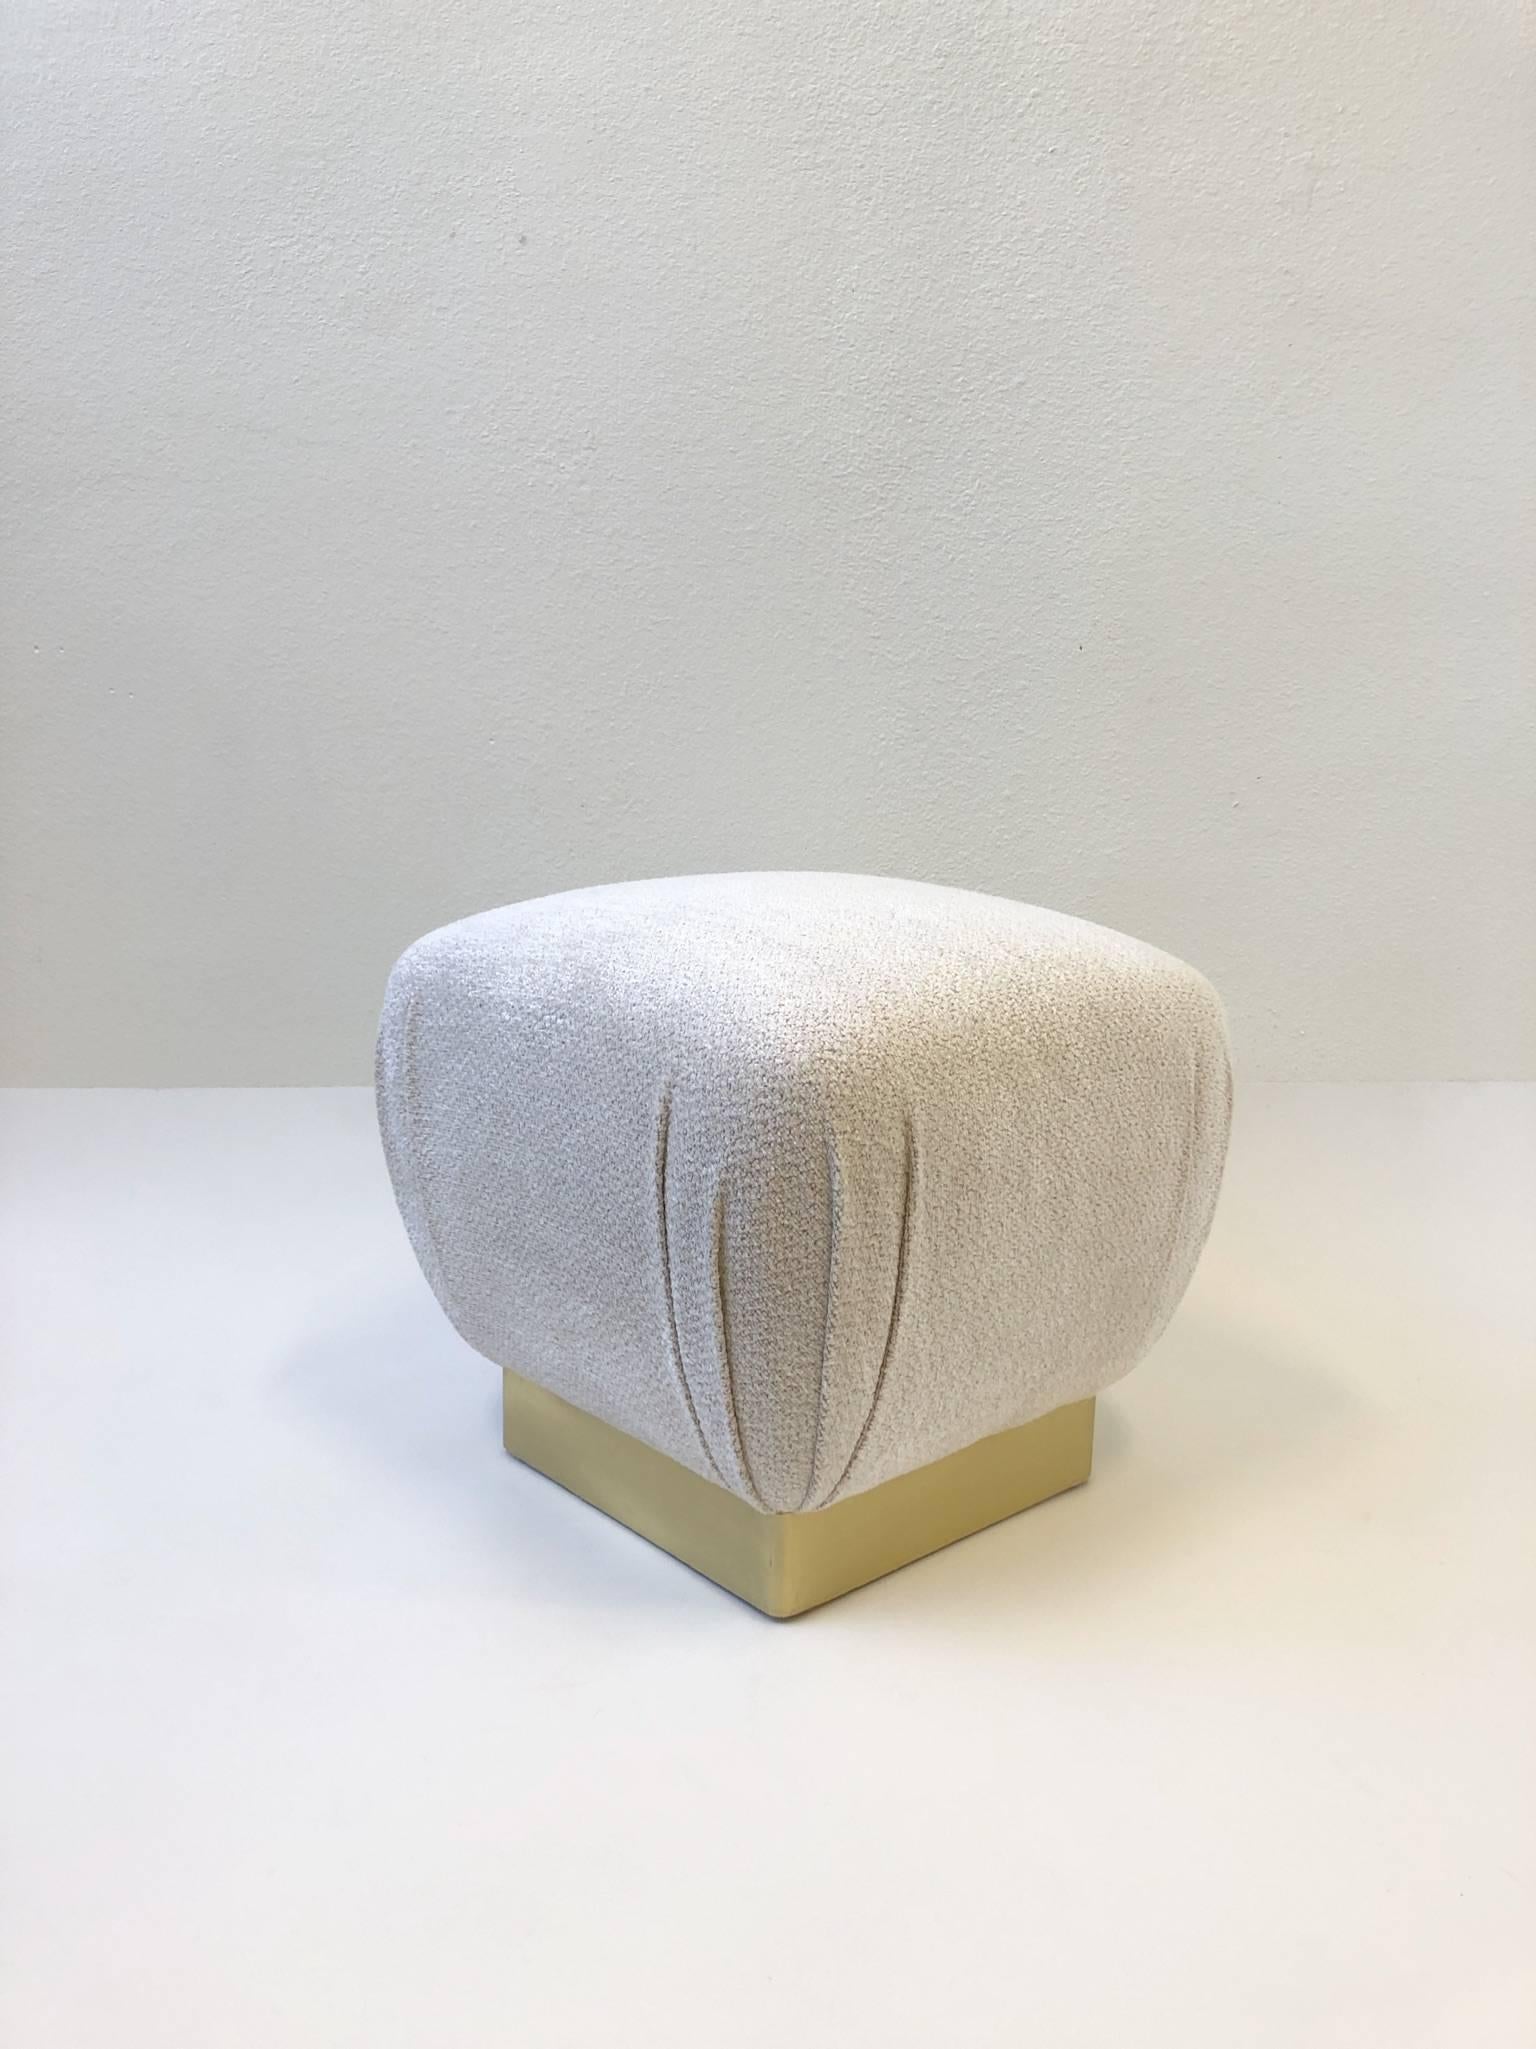 American Pair of Satin Brass and Fabric Poufs by Marge Carson